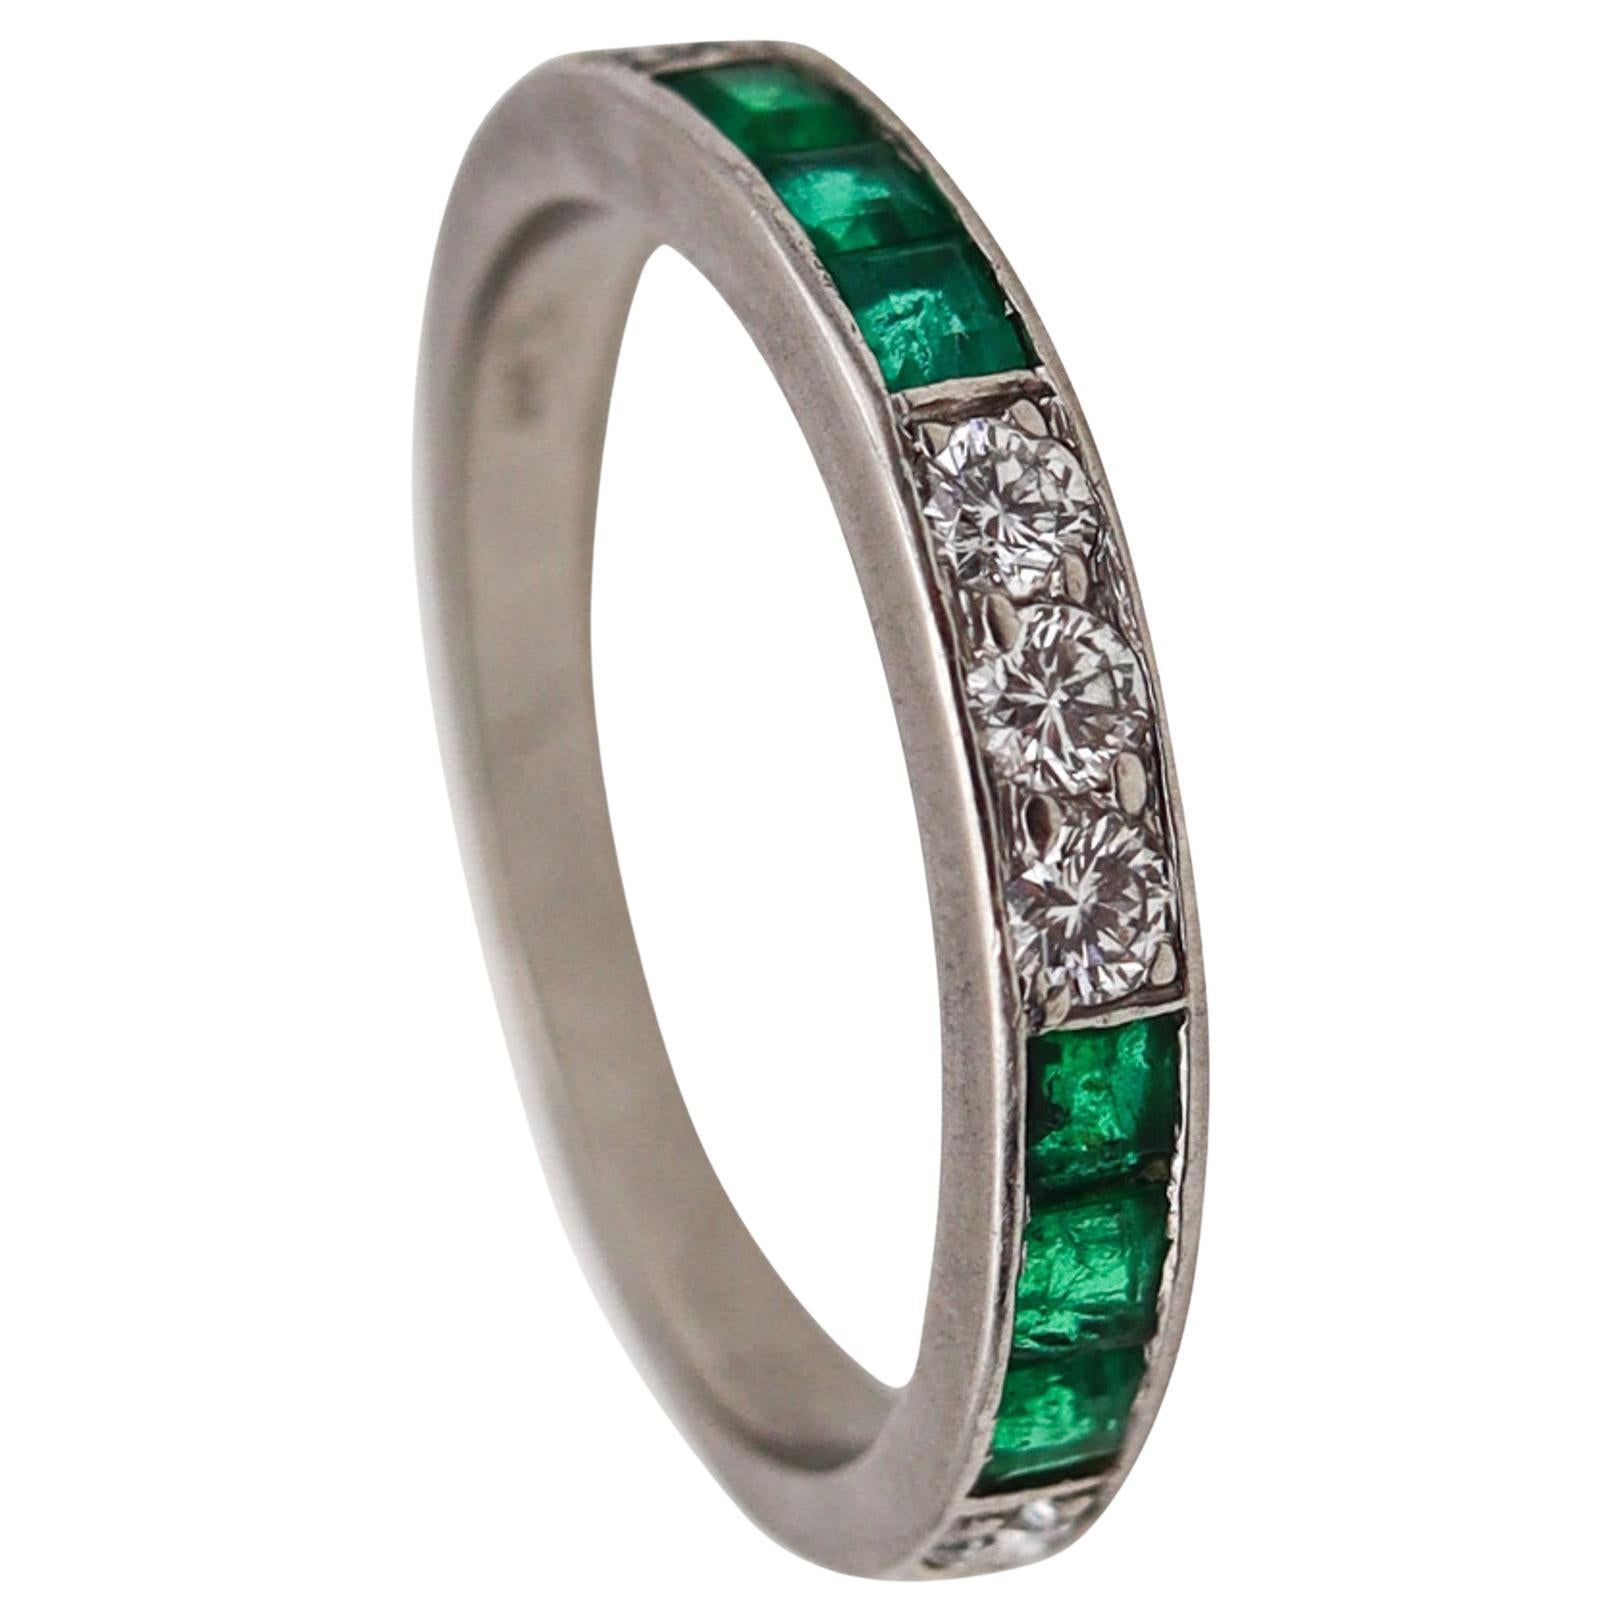 Art Deco 1930 Half Eternity Ring In Platinum With 1.02 Ctw Diamonds And Emeralds For Sale